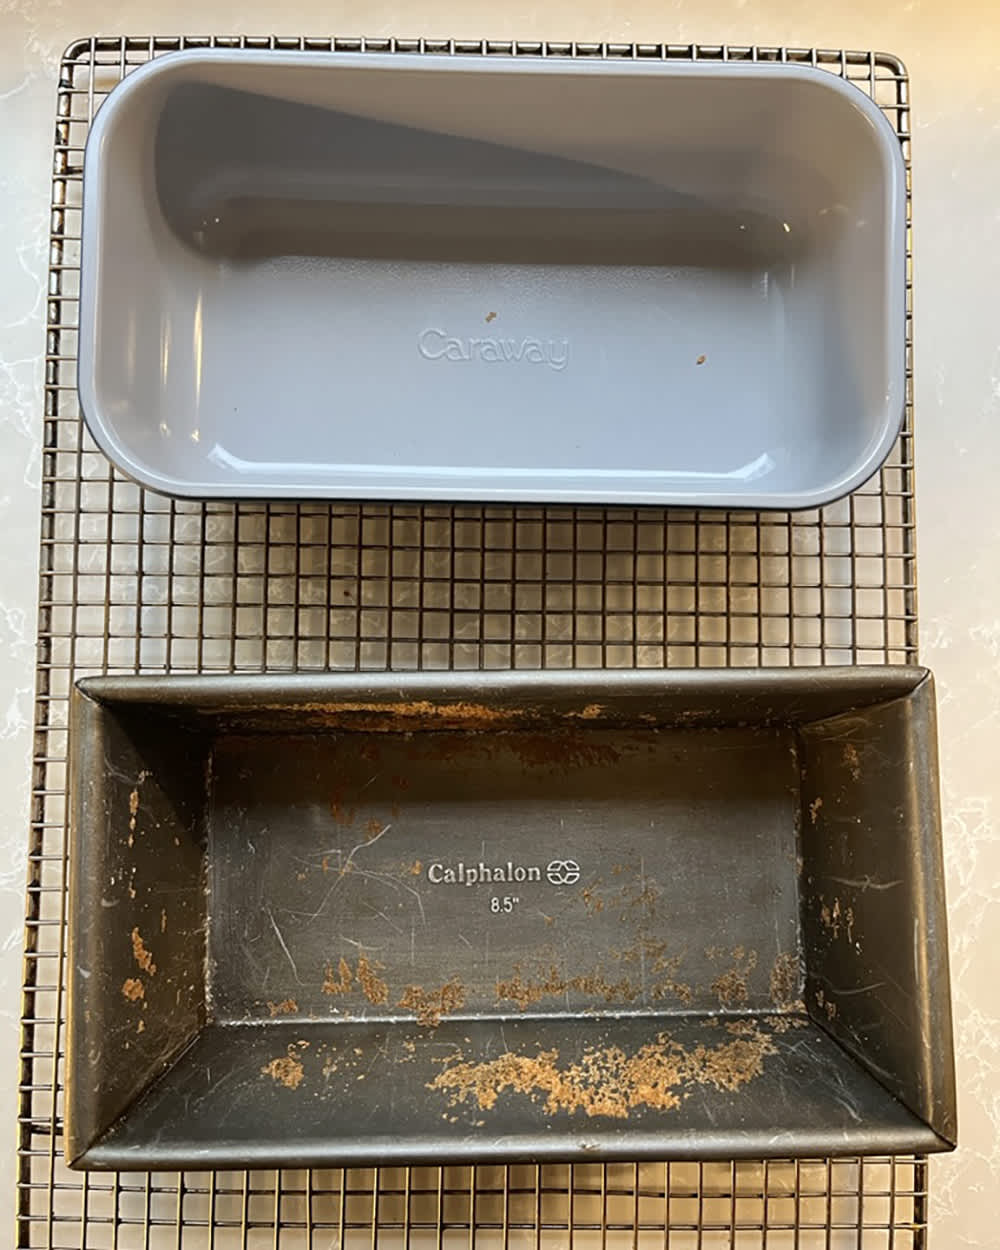 Caraway Bakeware Review 2023 - Tested, Photos